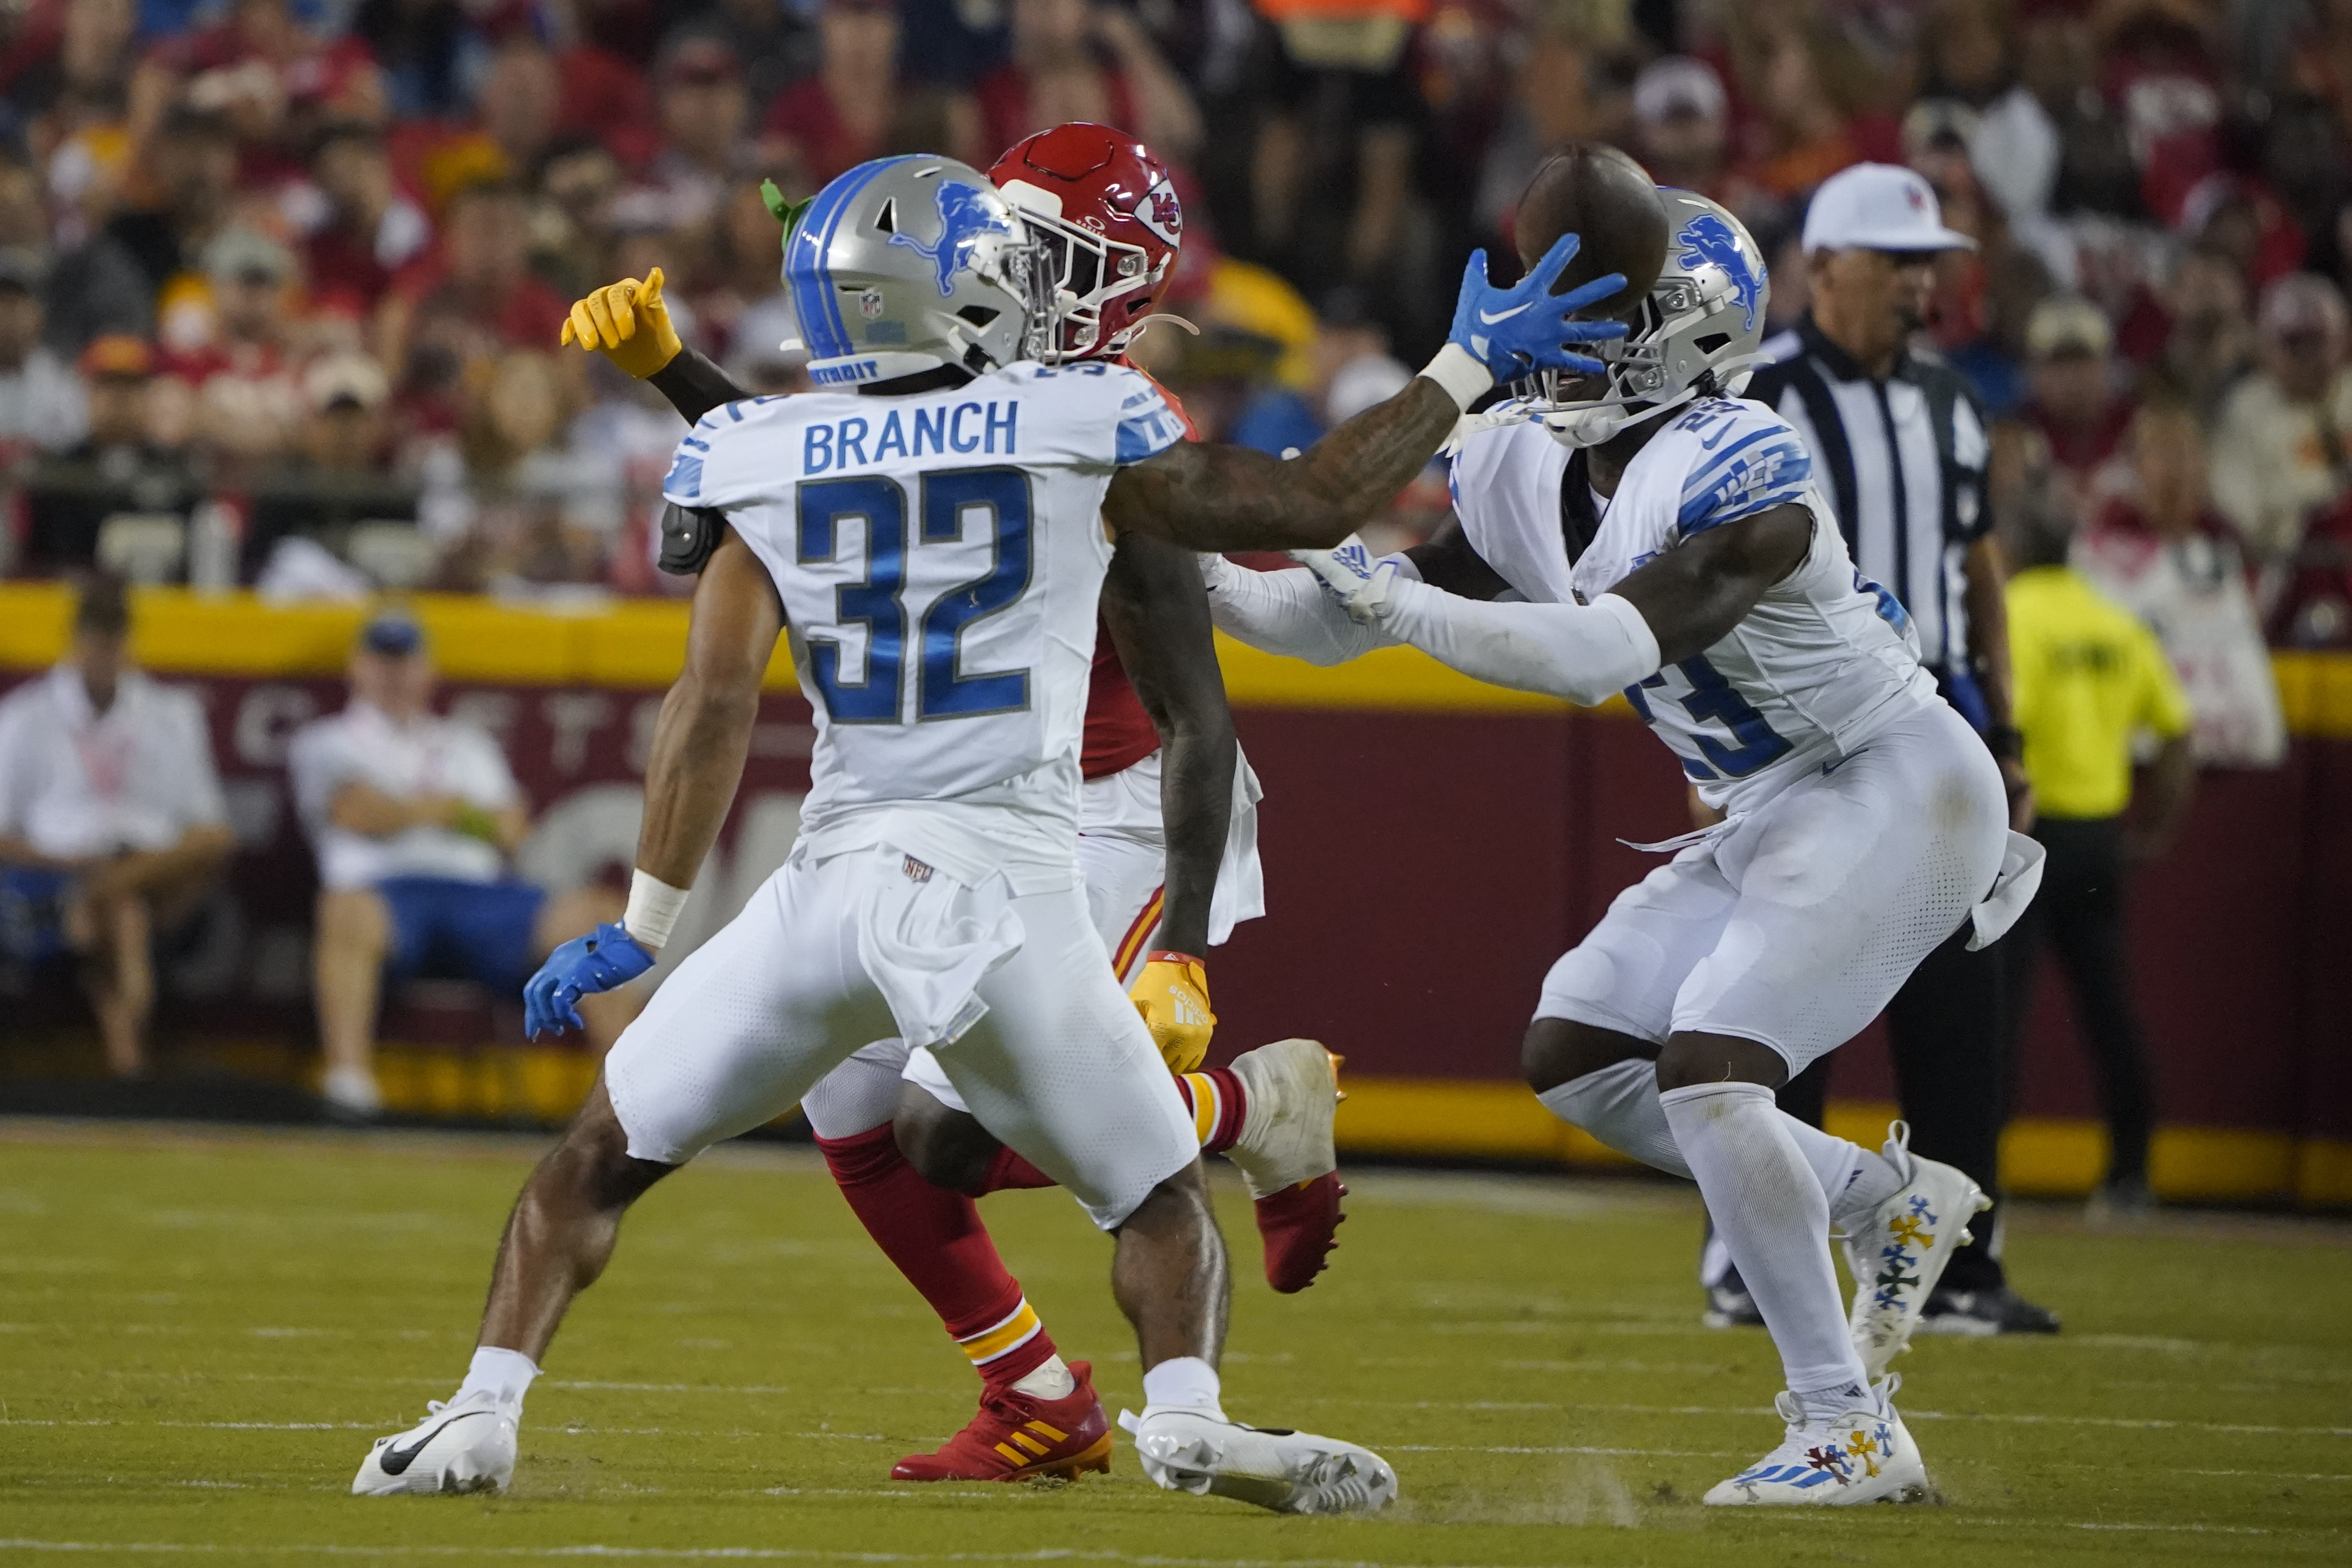 Lions rookie Brian Branch: I've watched the pick-six 100 times